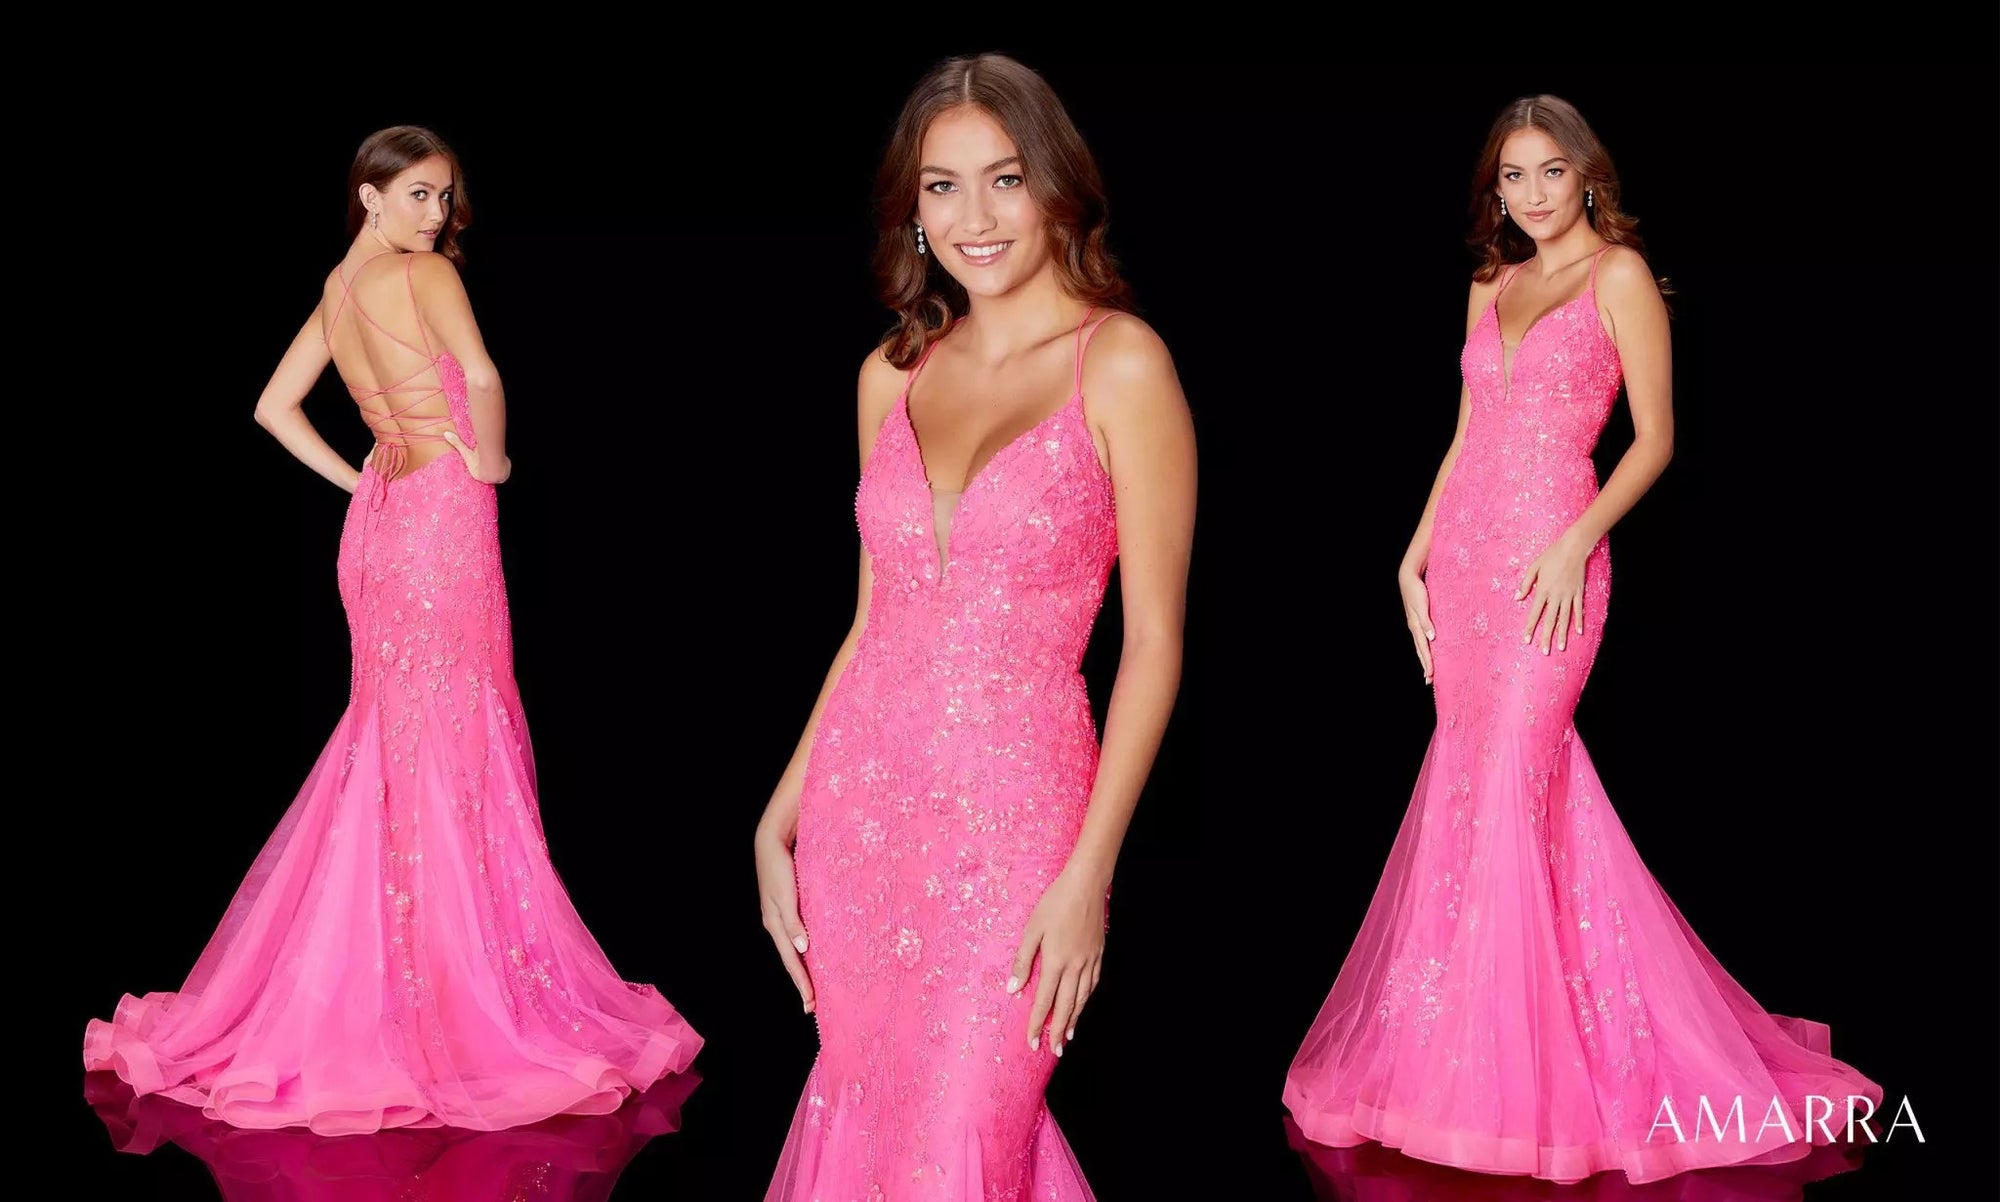 Prom Style Guide: How to Plan for the Perfect Prom Night